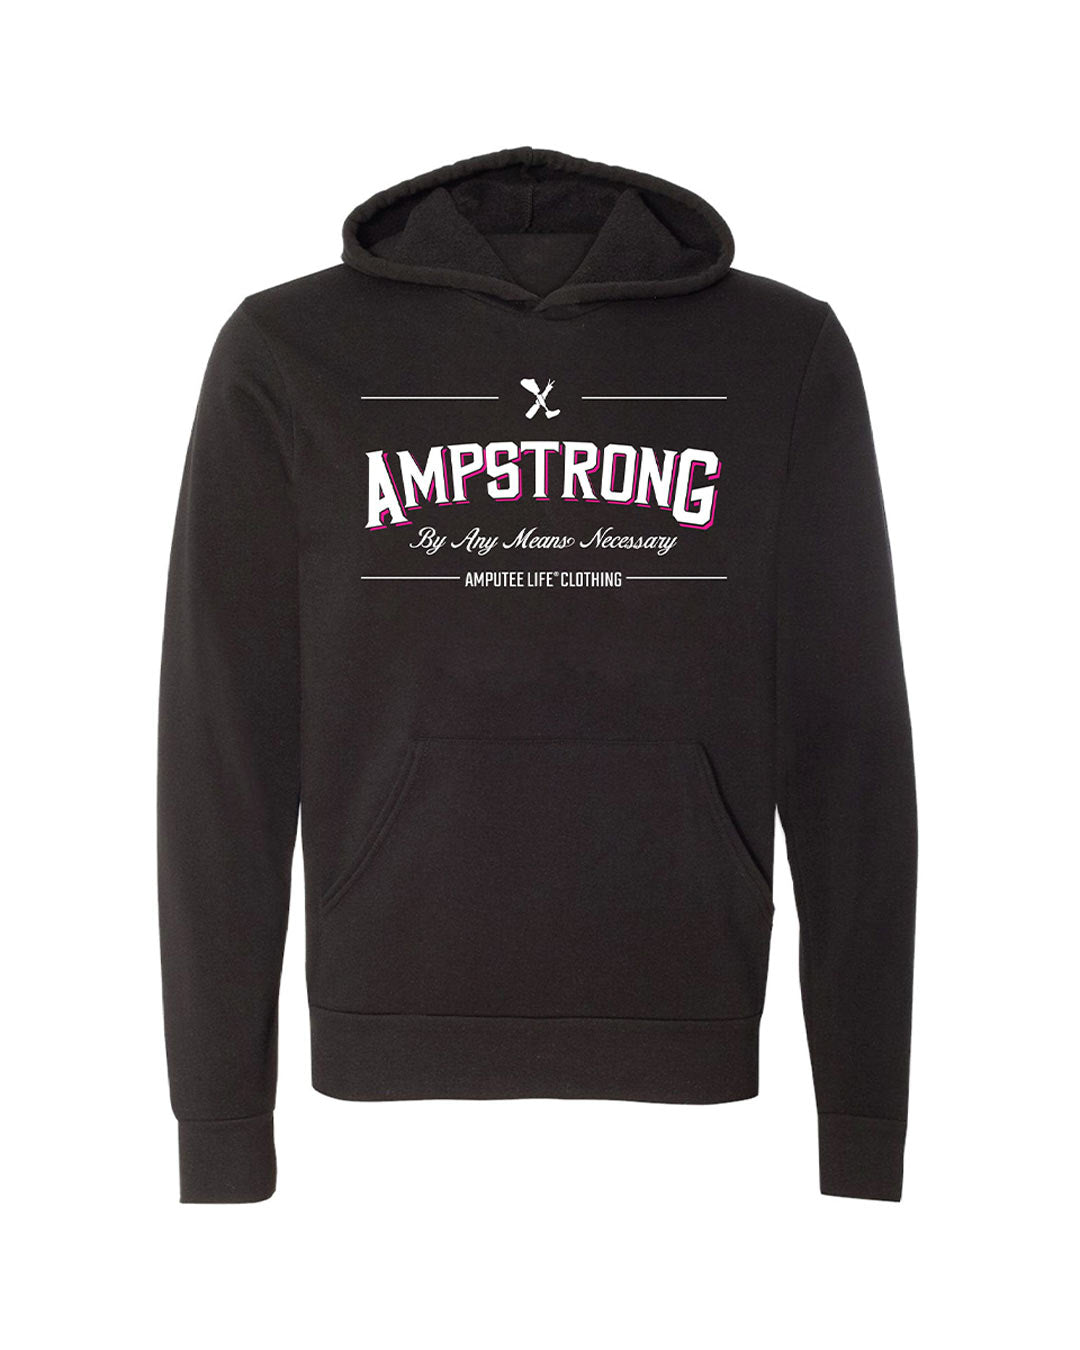 AMPSTRONG - AMPLIFE™